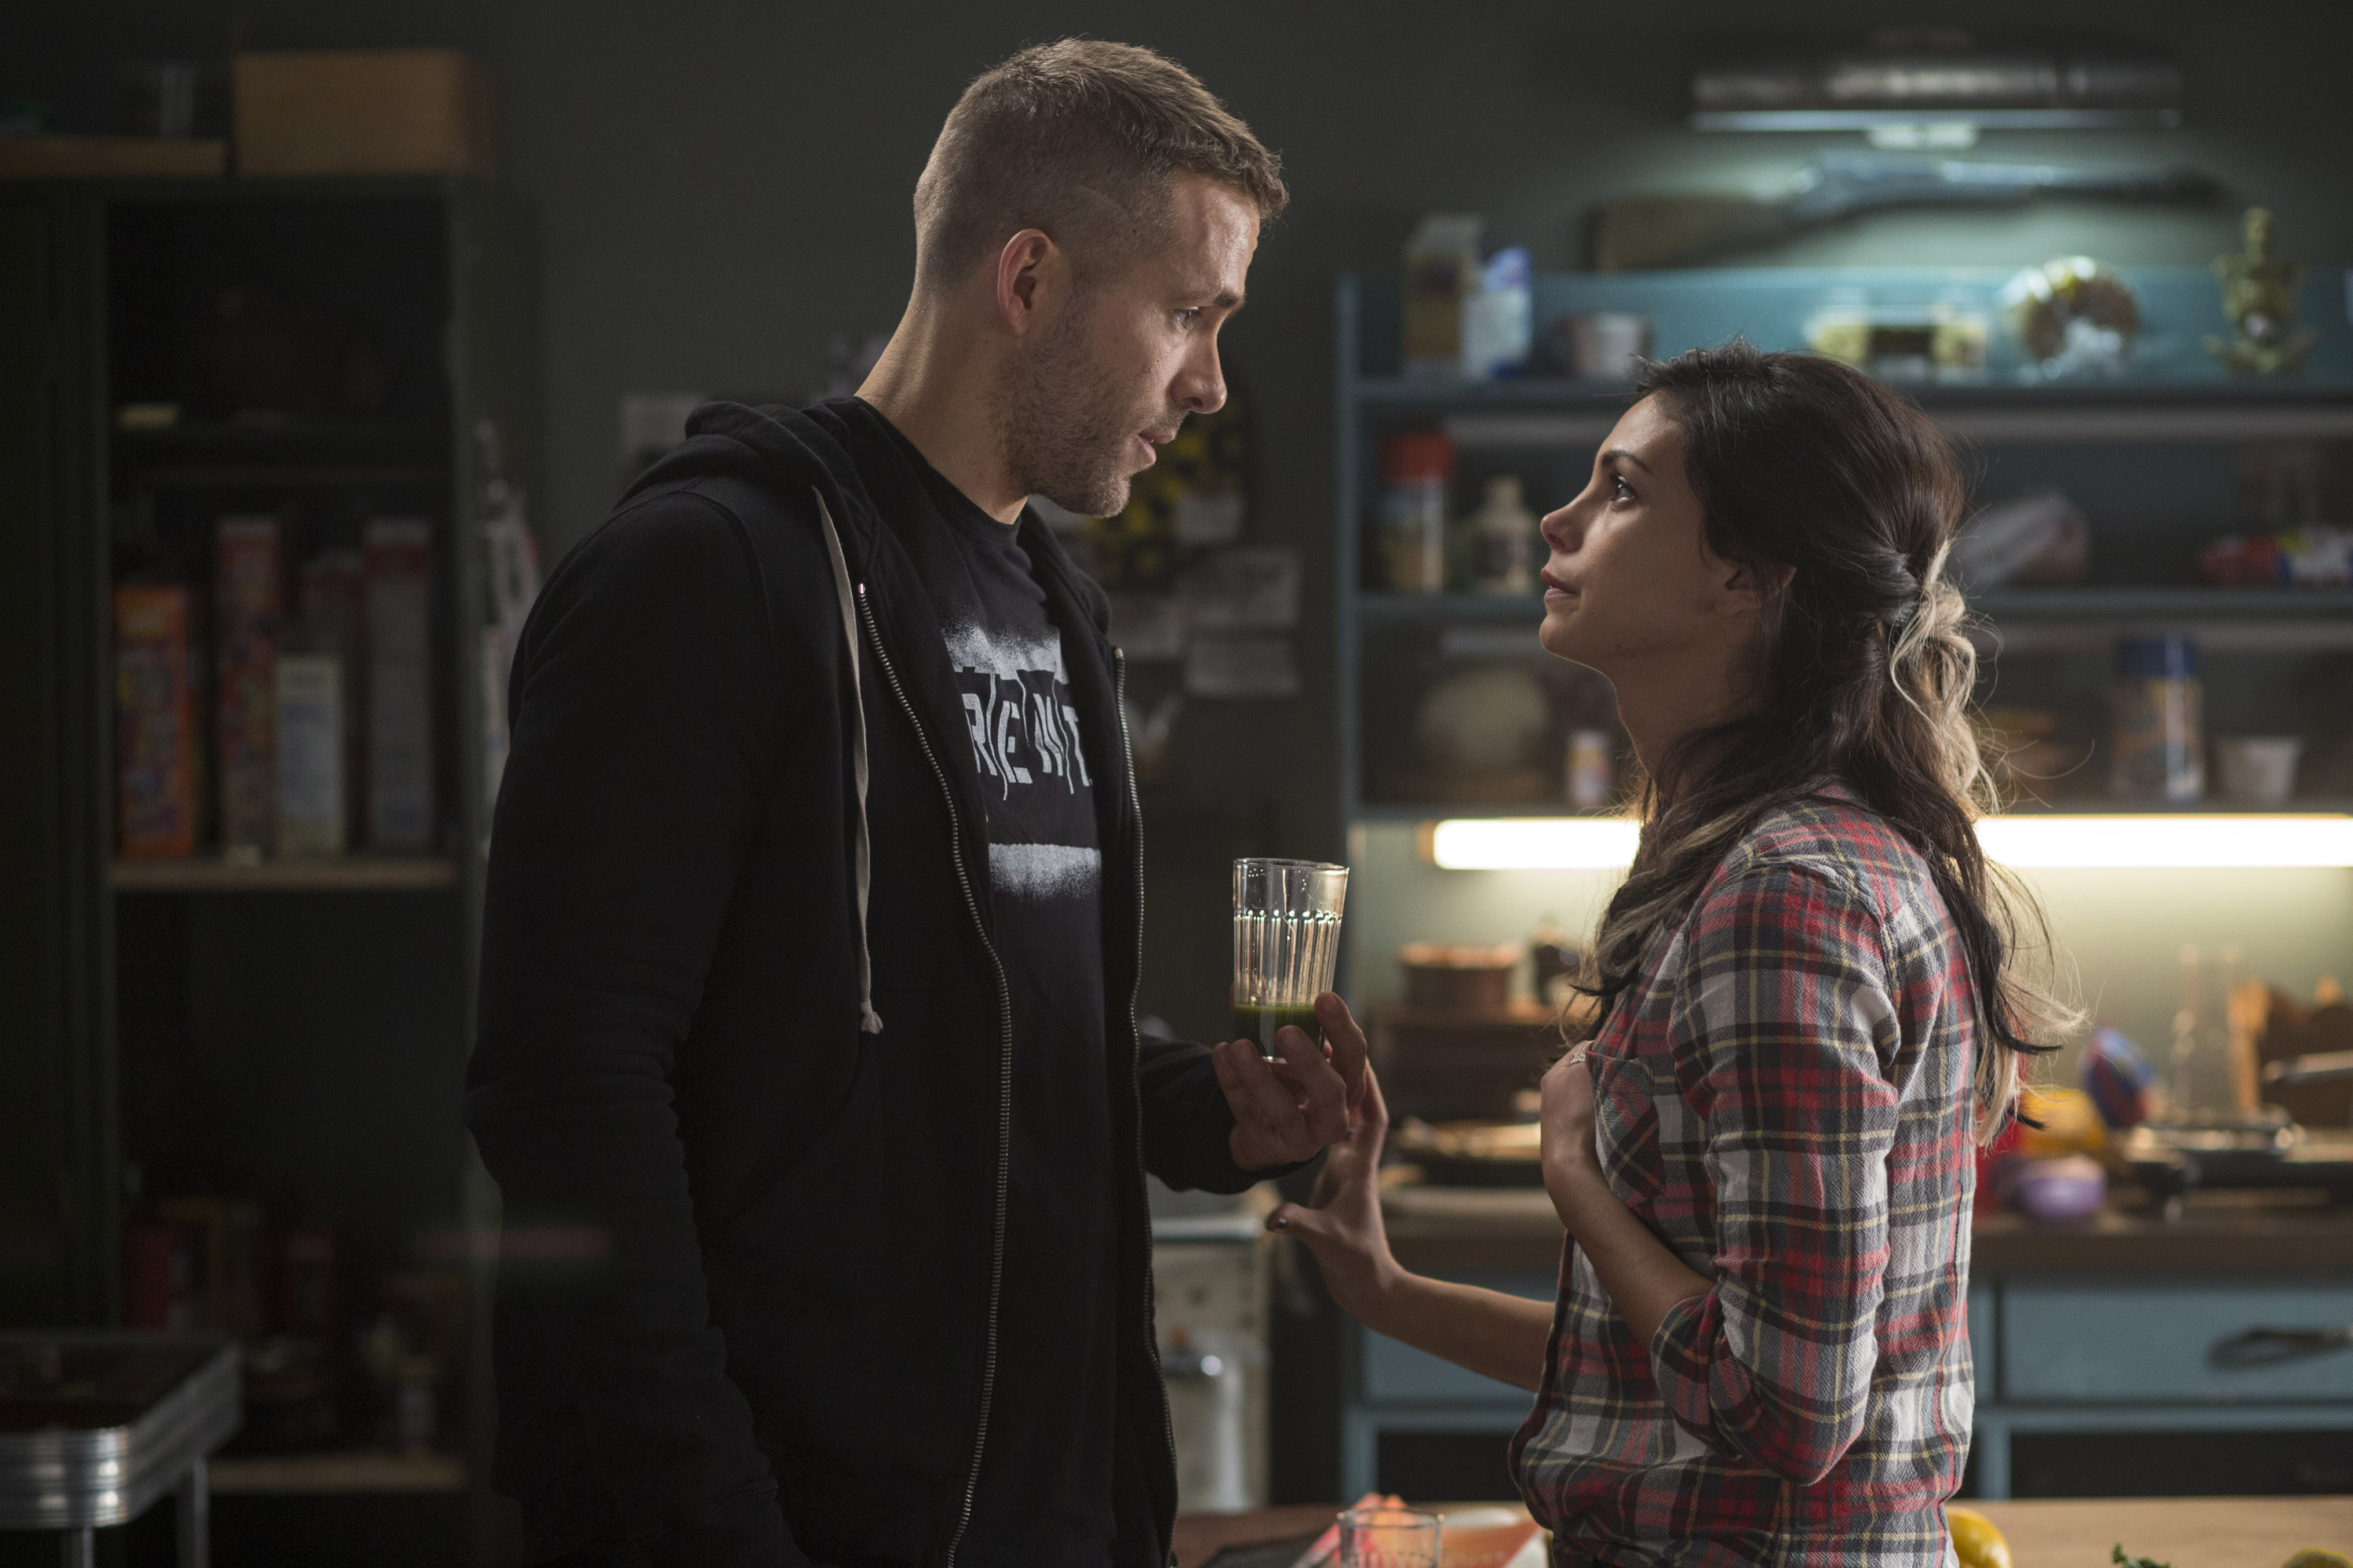 DEADPOOL Wade Wilson (Ryan Reyonlds) and new squeeze Vanessa (Morena Baccarin) trade some pointed barbs, in DEADPOOL. Photo Credit: Joe Lederer TM & © 2015 Marvel & Subs.  TM and © 2015 Twentieth Century Fox Film Corporation.  All rights reserved.  Not for sale or duplication.